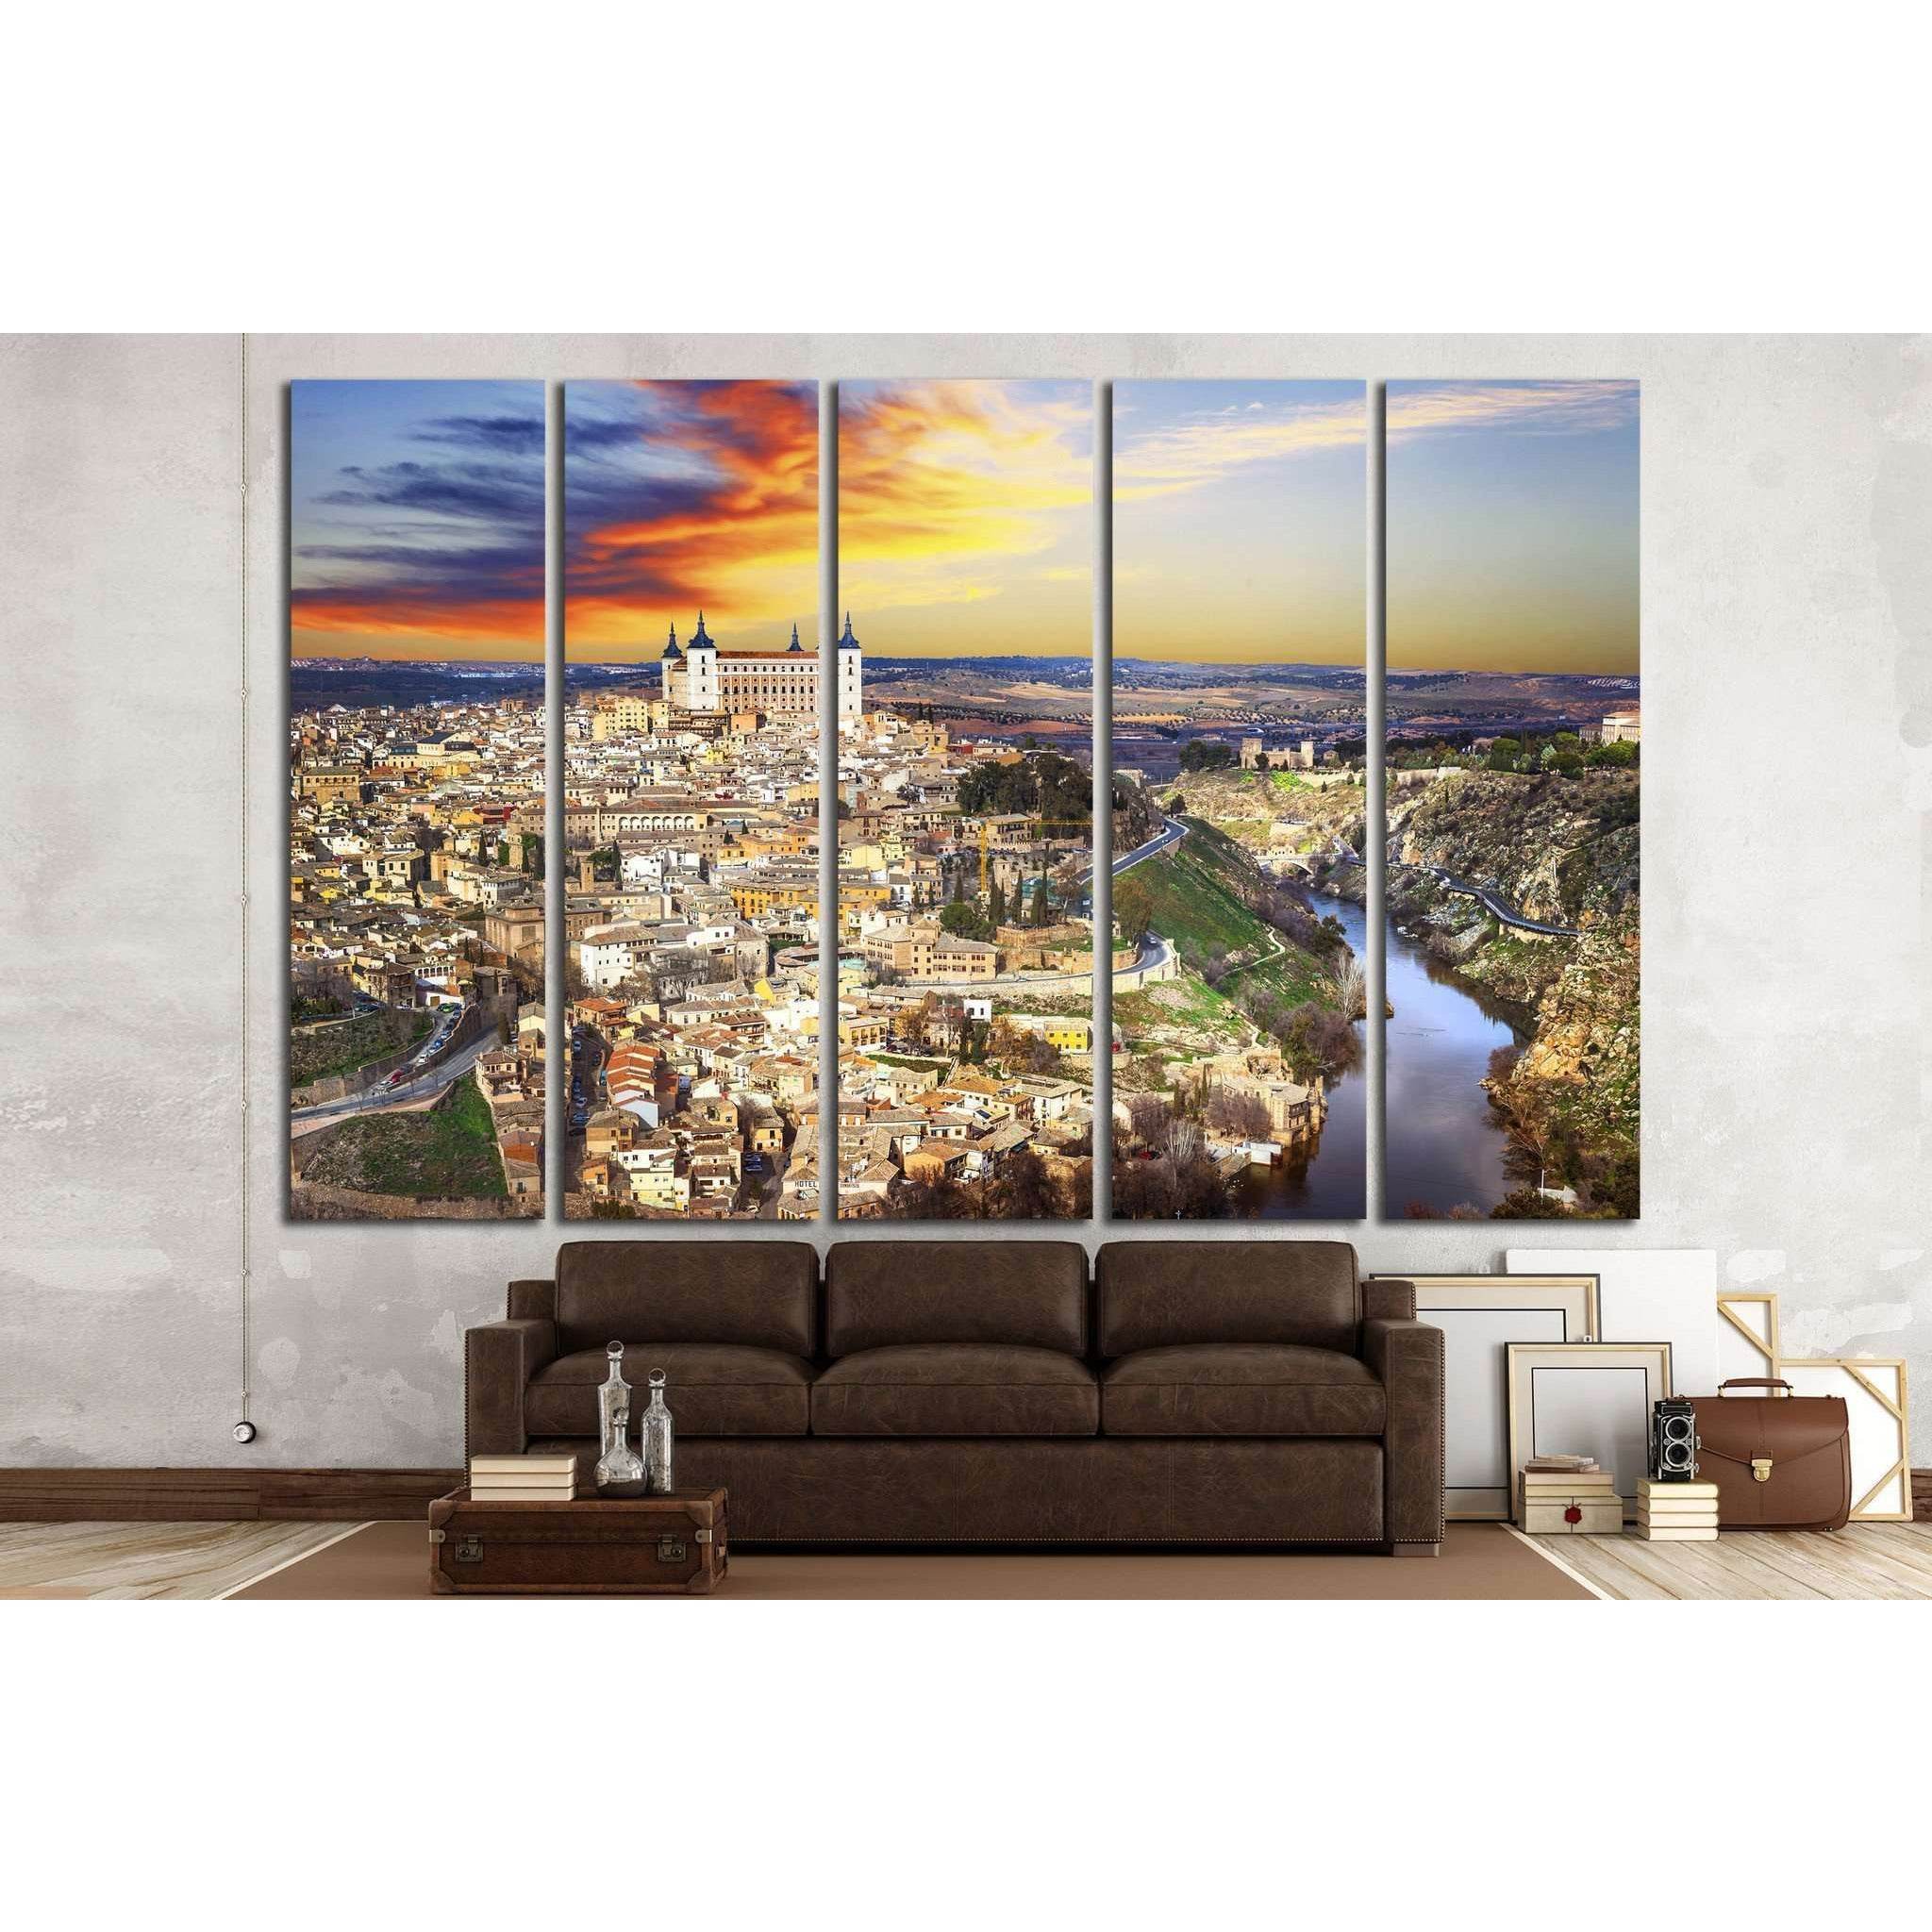 beautiful sunset over old Toledo, Spain №1694 Ready to Hang Canvas Print